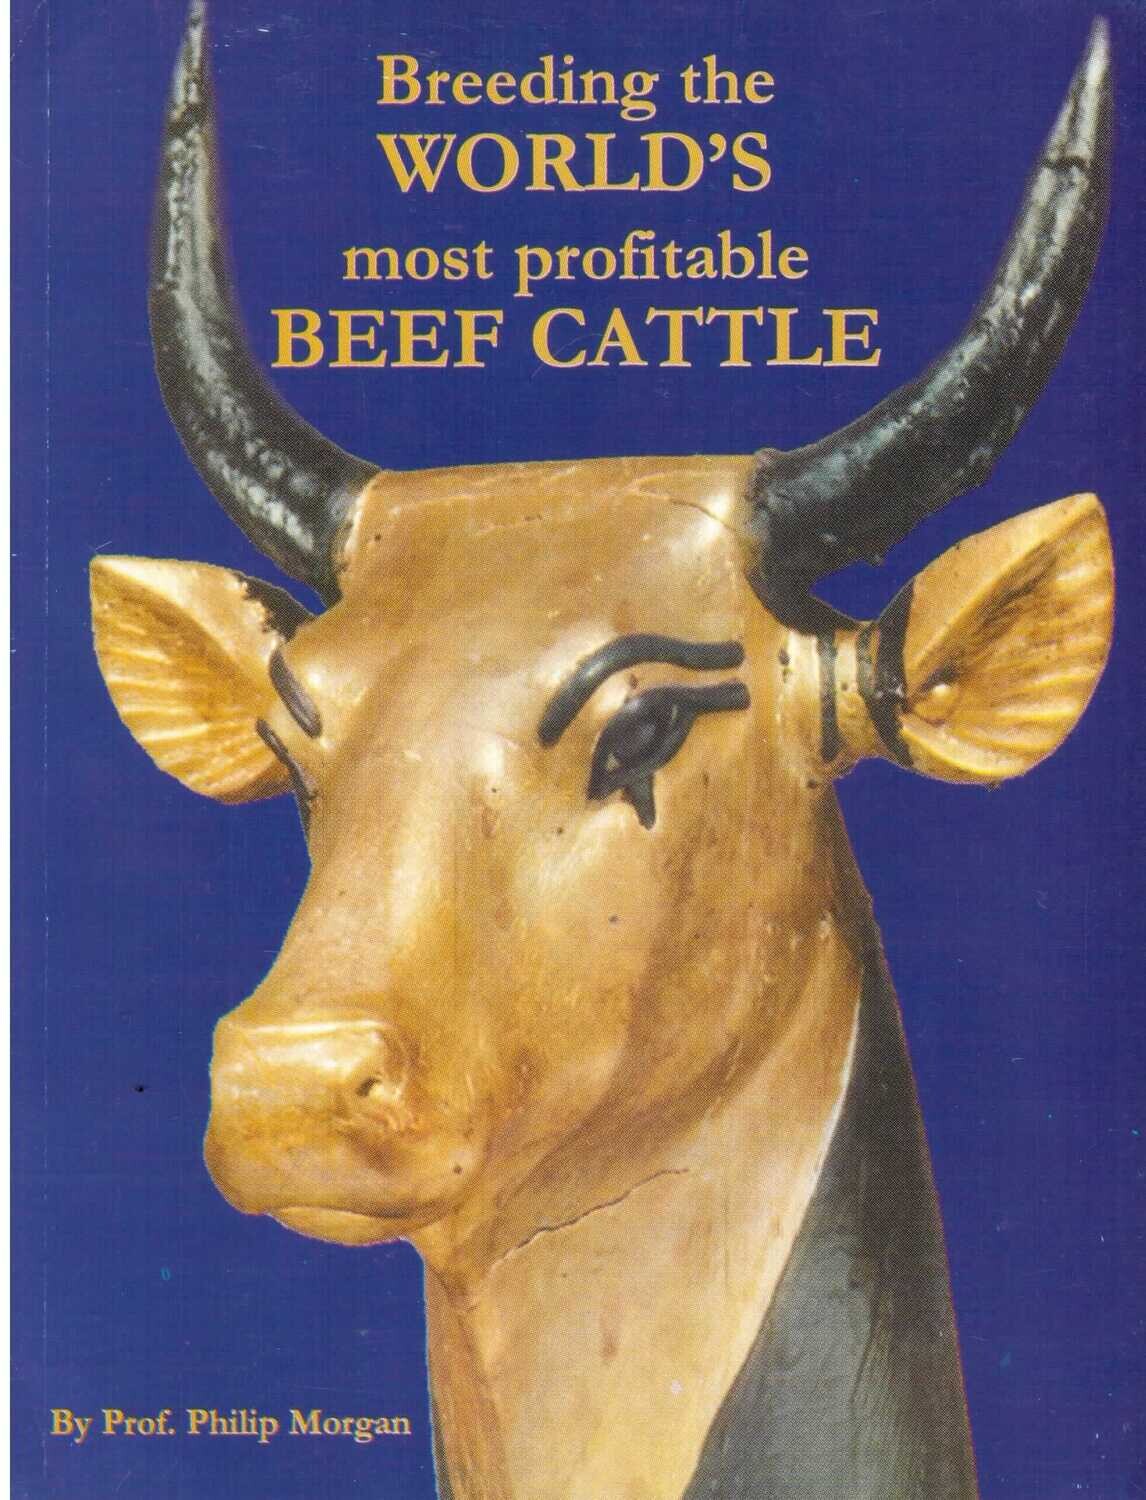 Breeding the World's most profitable Beef Cattle